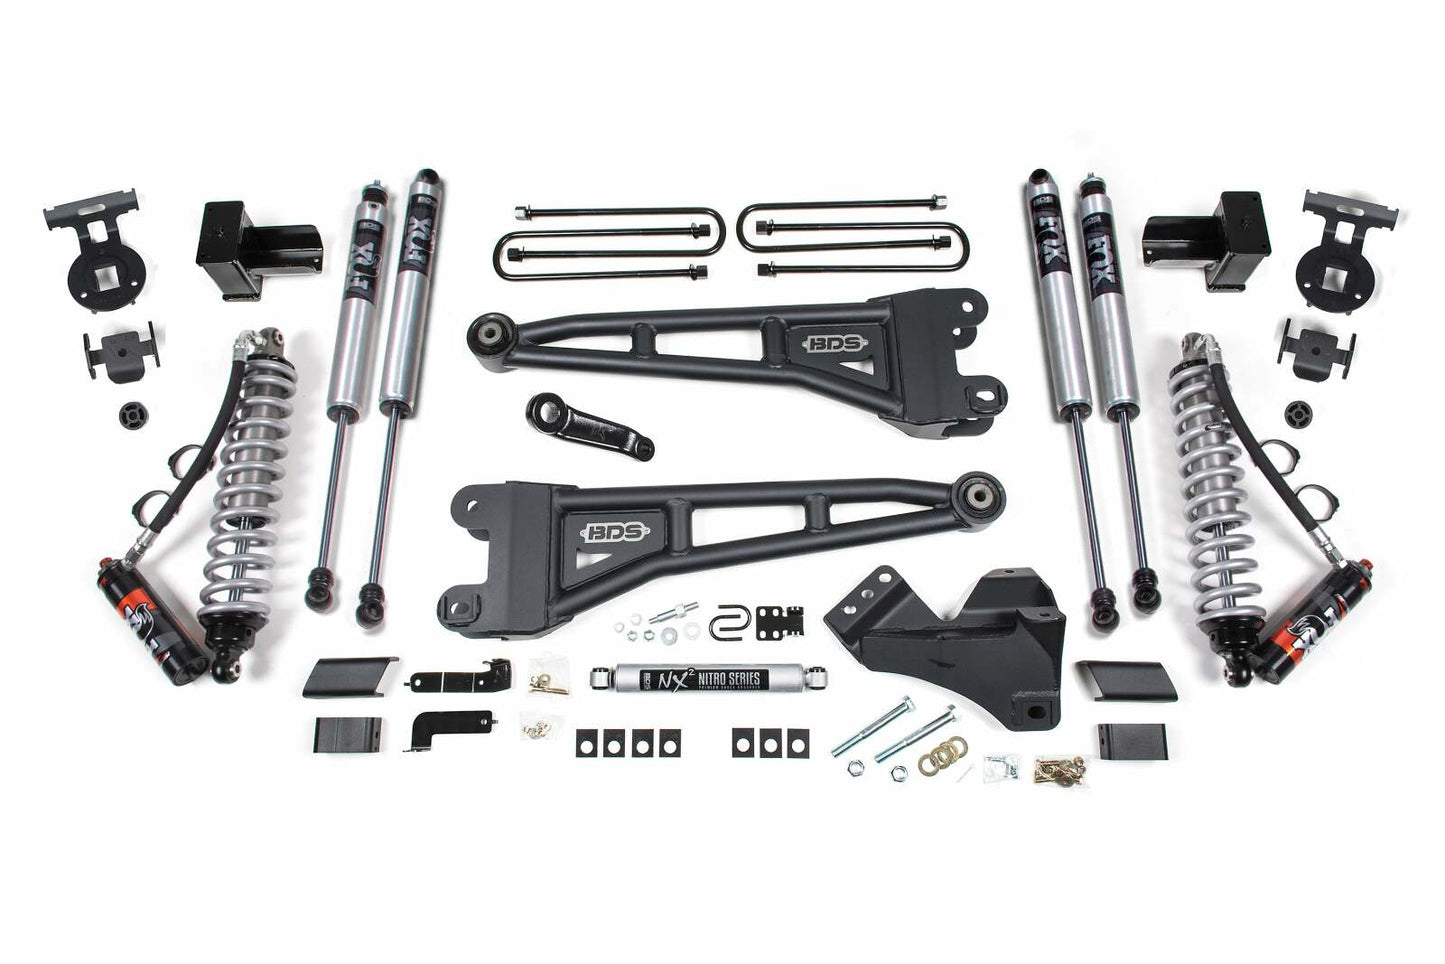 2017-2019 Ford F250/F350 4wd 6" 4-Link Suspension Lift Kit, 6" Rear, Spring, Diesel - Fox 2.5 PES C/O Front, Fox 2.5 PES Aux Front, Fox 2.5 PES Rear